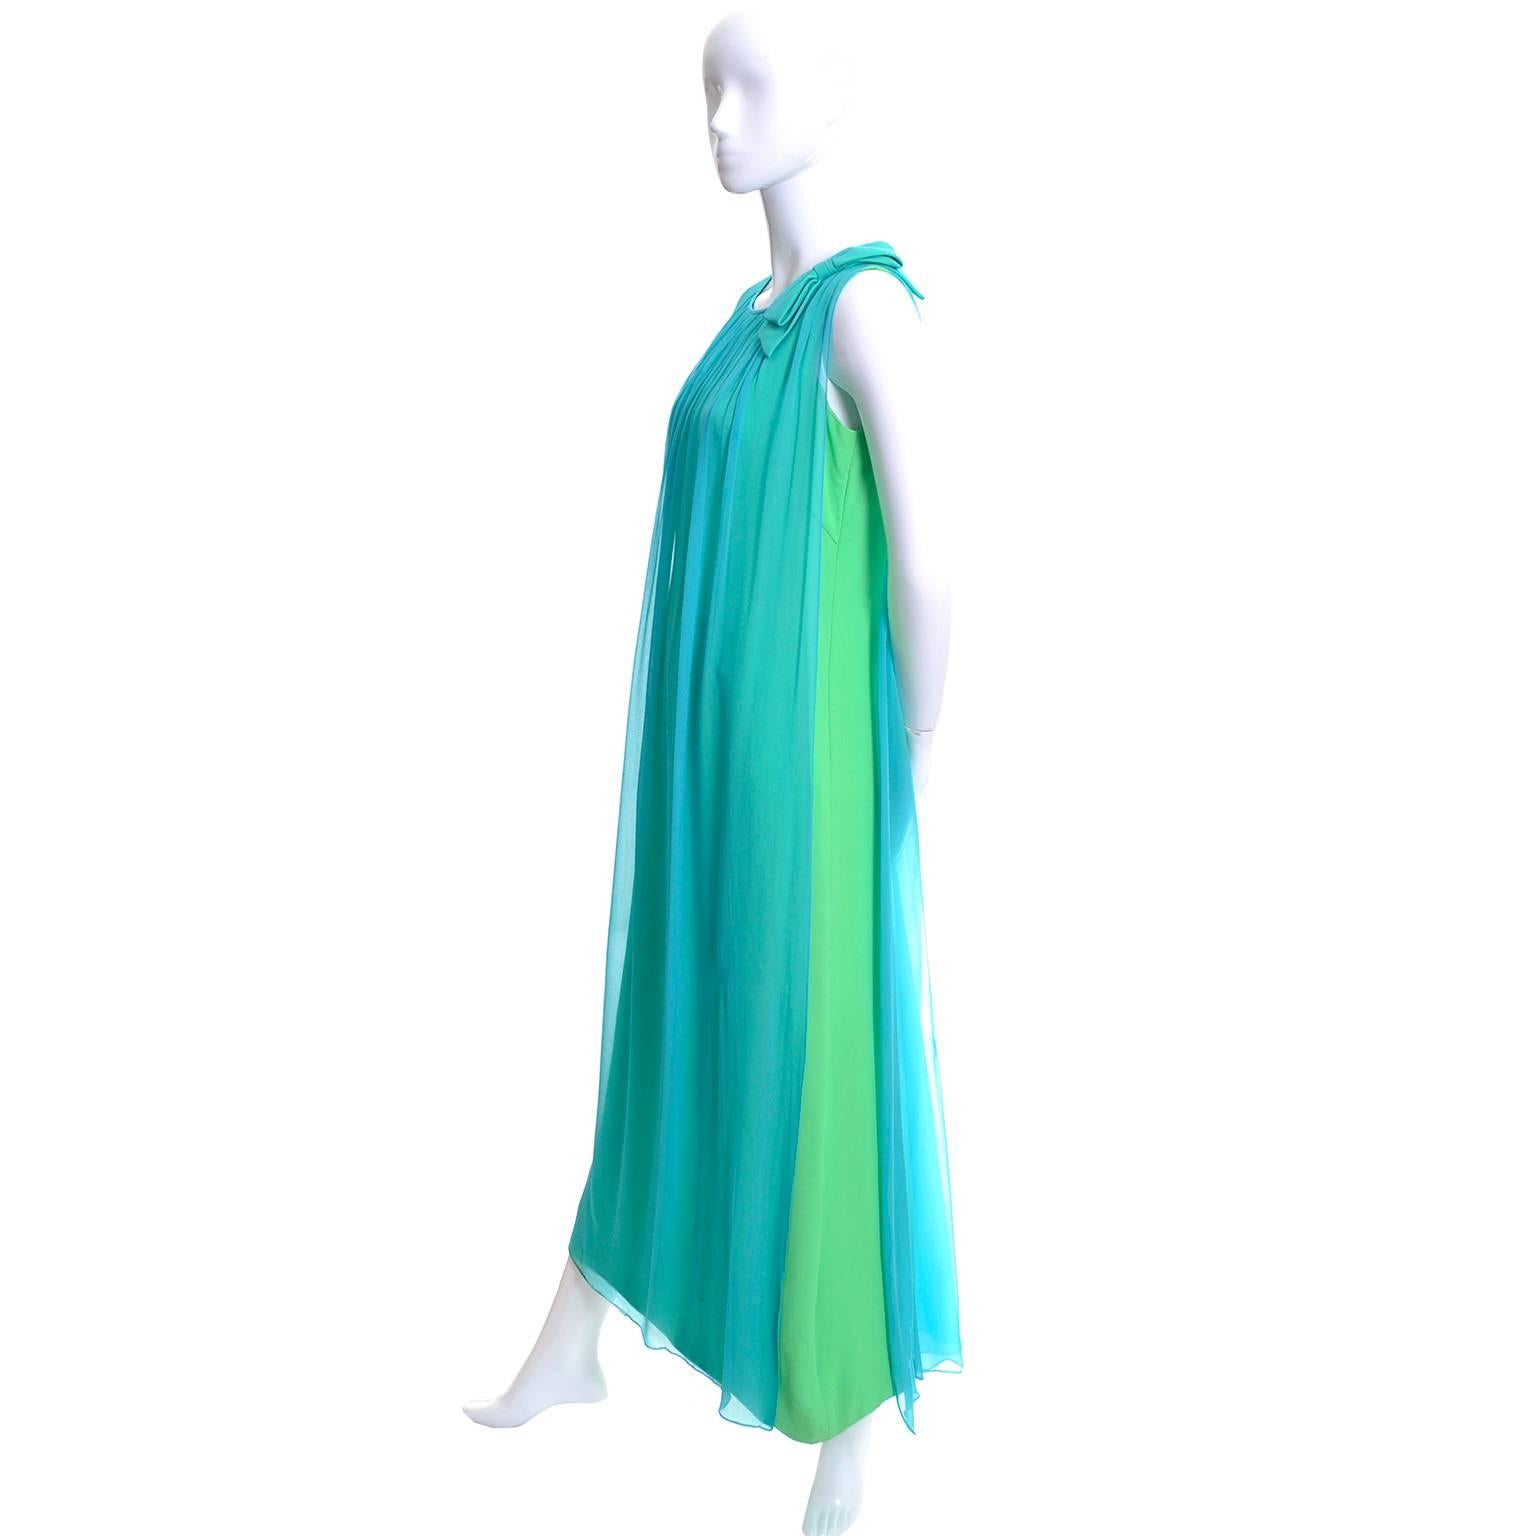 This great vintage dress is from the 1960's.  There is a green satin evening gown with an aqua blue silk chiffon overlay with a bow on one of the shoulders.  Beautiful flowing vintage dress that I estimate to be a modern day US size 6/8, but please